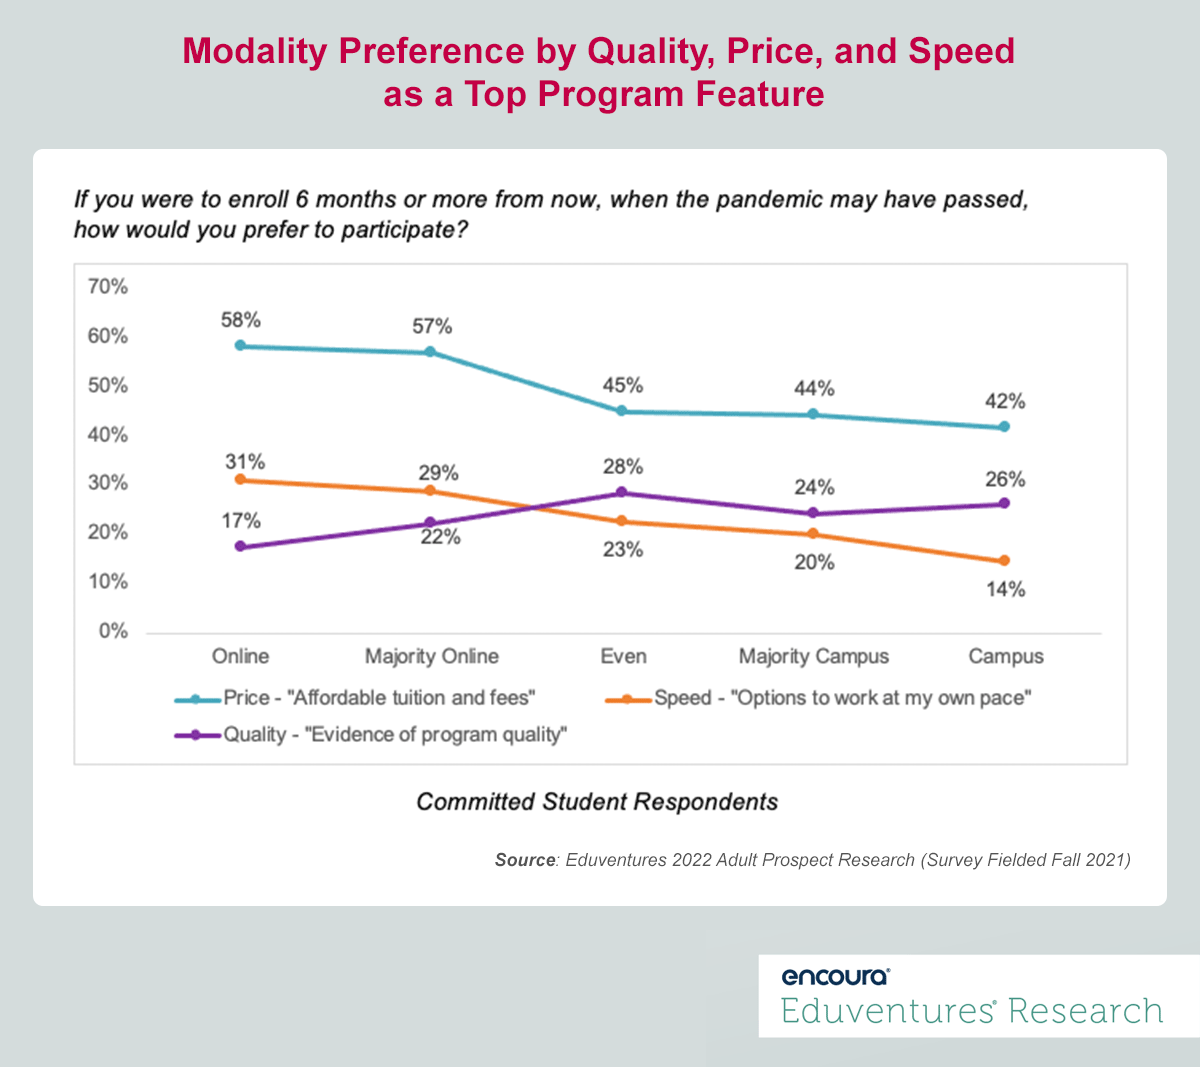 Modality Preference by Quality, Price, and Speed as a Top Program Feature